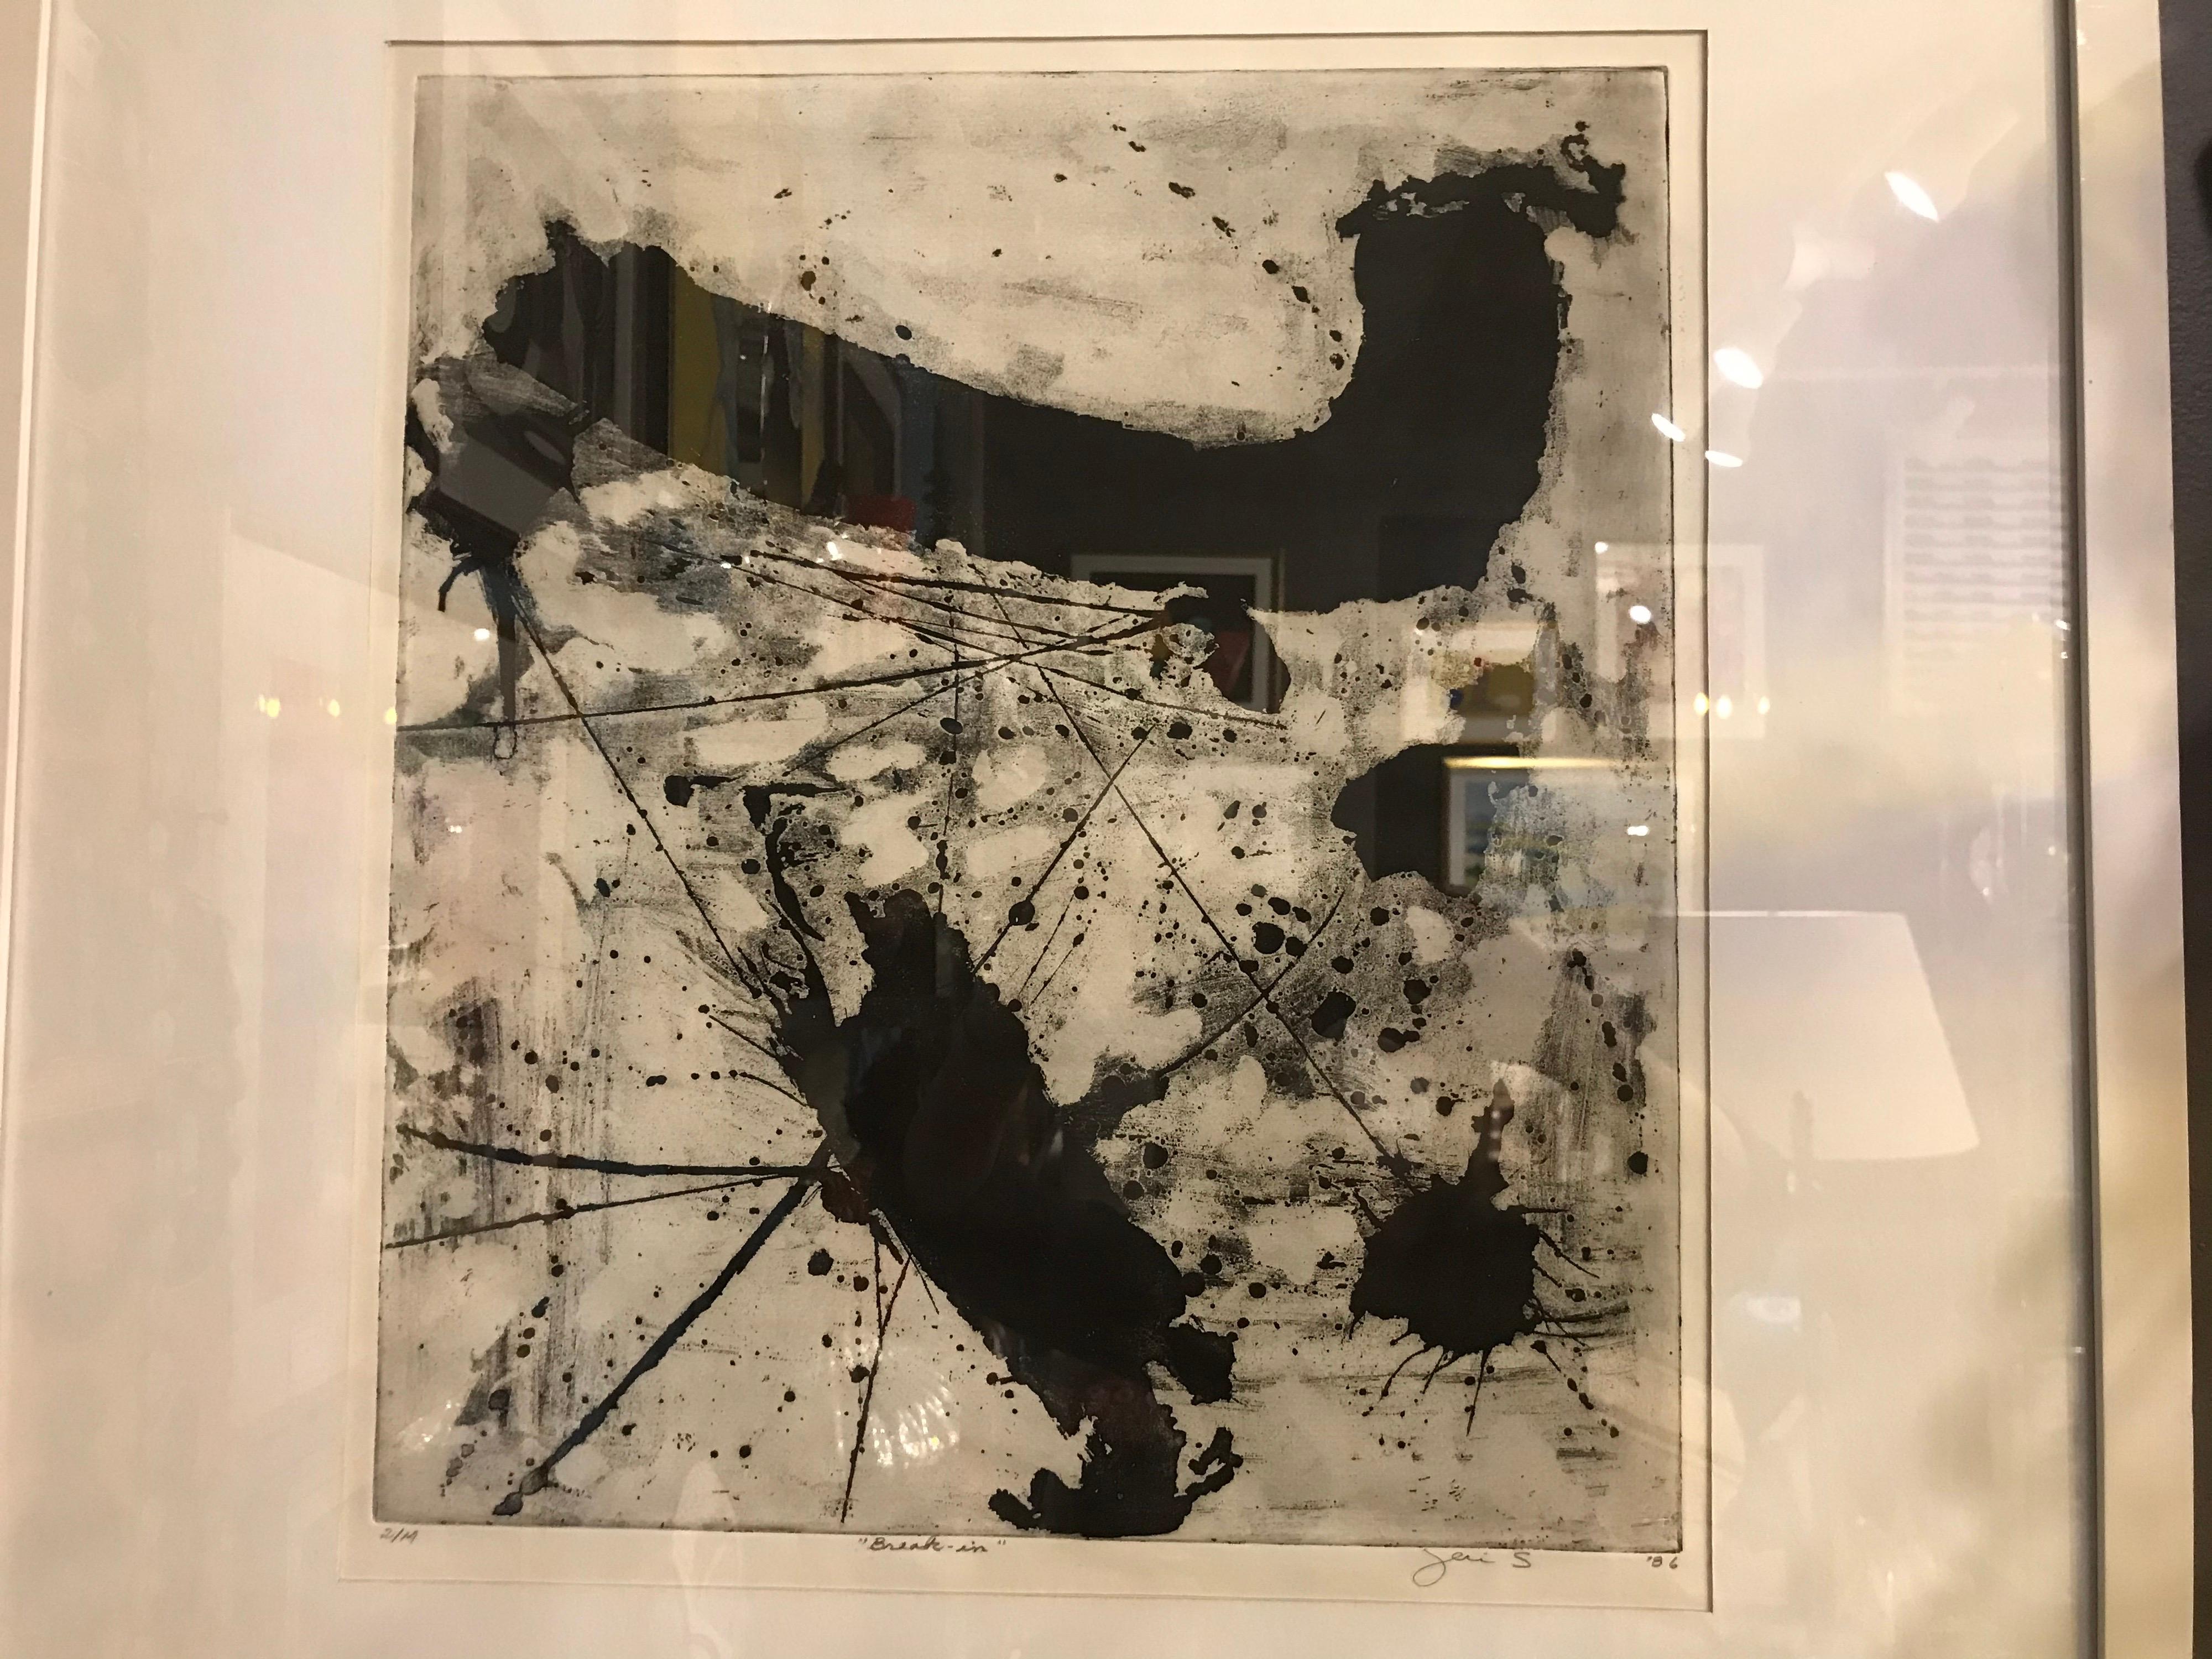 This black and white abstract watercolor was done by the Ohio artist Jeri Summers in 1986 and it’s in its original frame Titled 